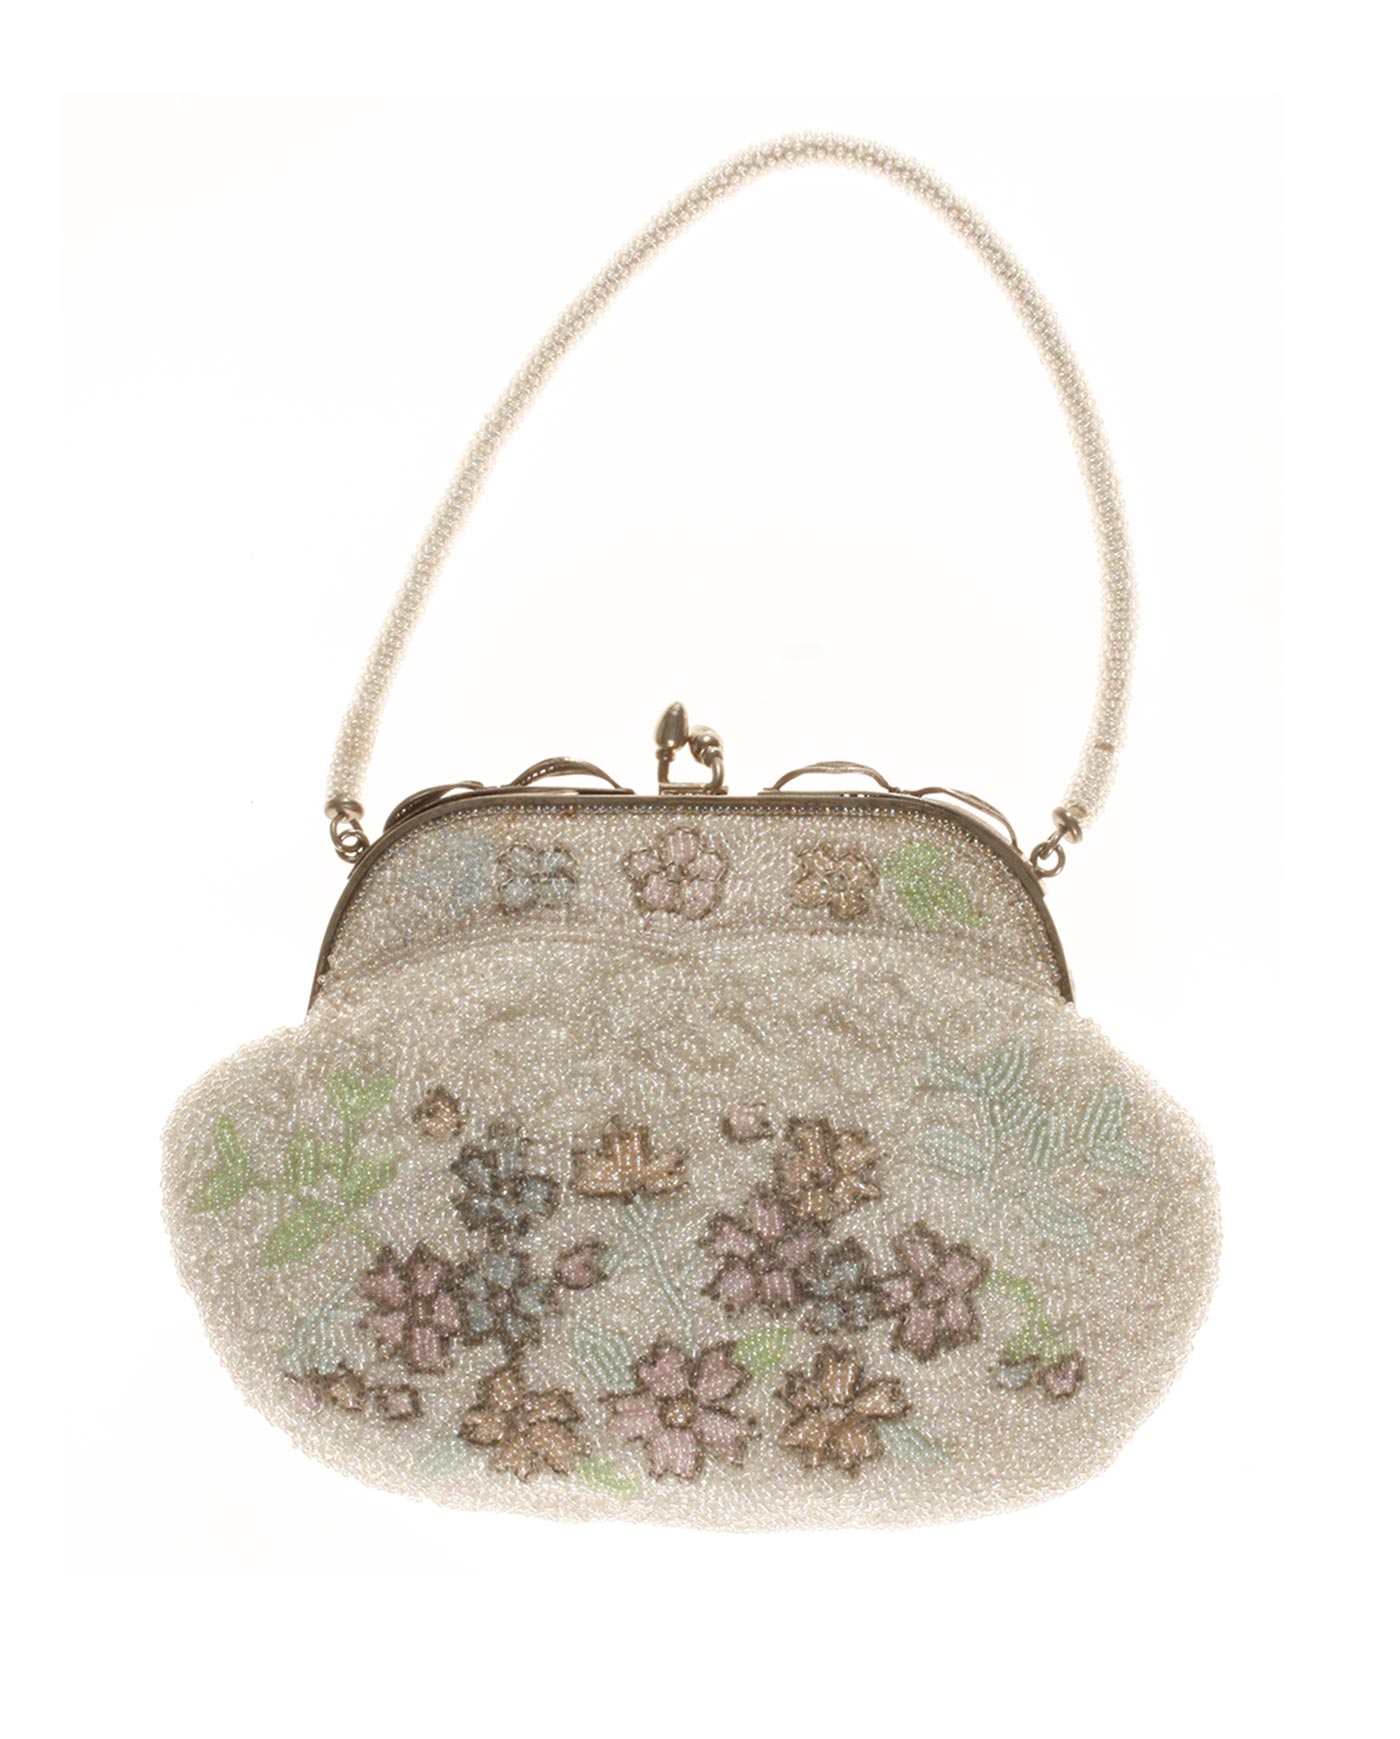 vintage Evening bag with pearls 40/50s